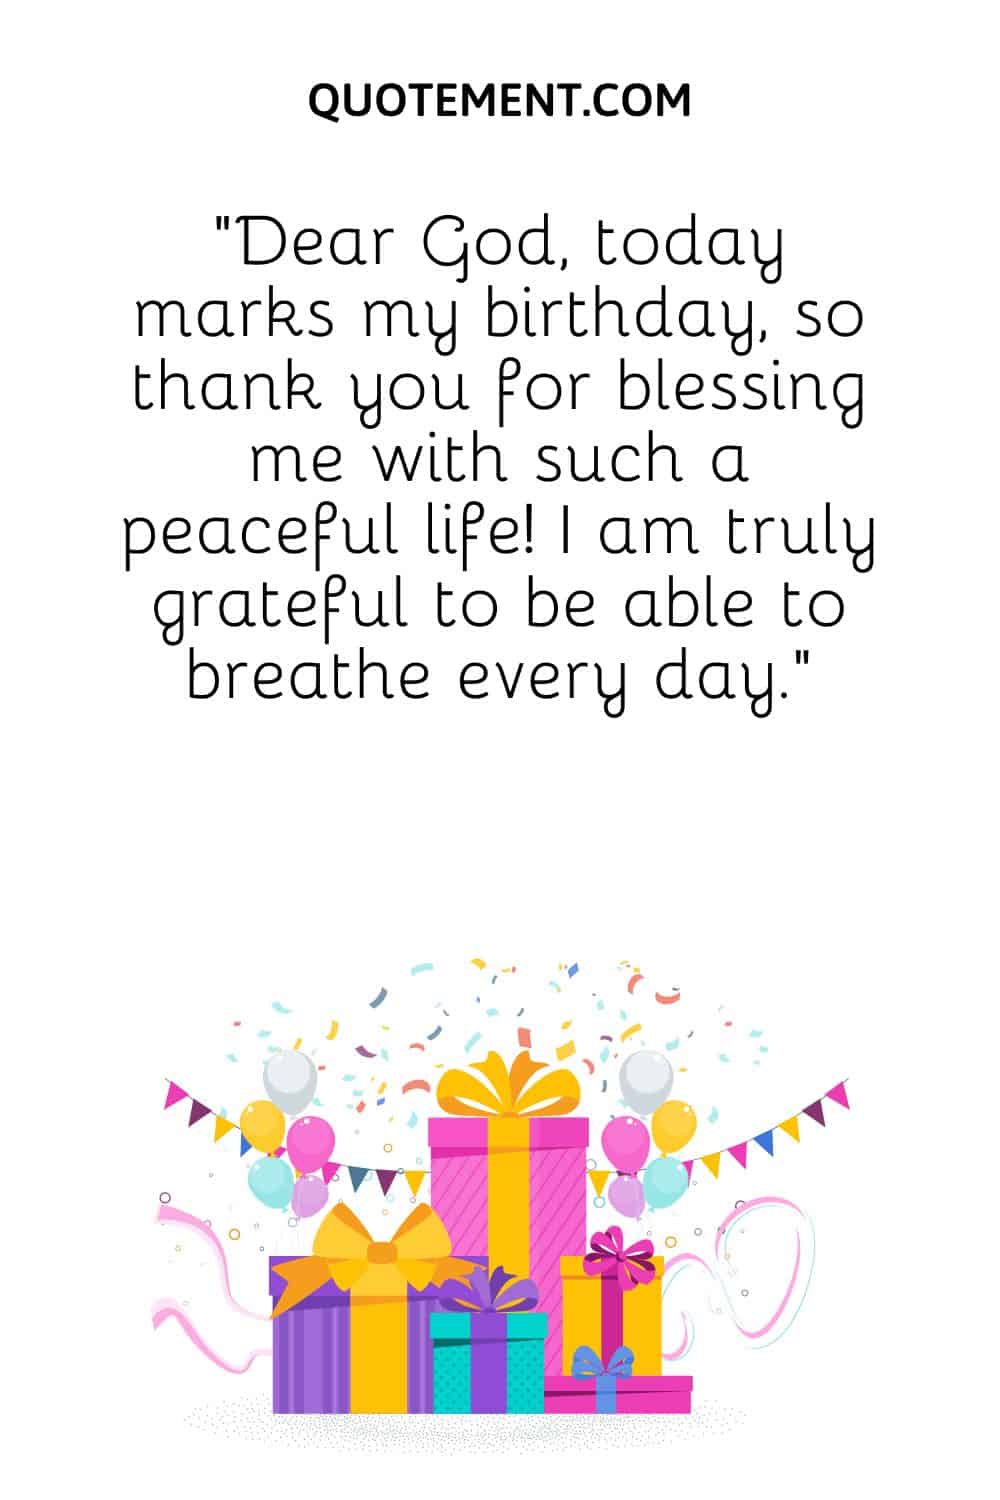 Dear God, today marks my birthday, so thank you for blessing me with such a peaceful life!